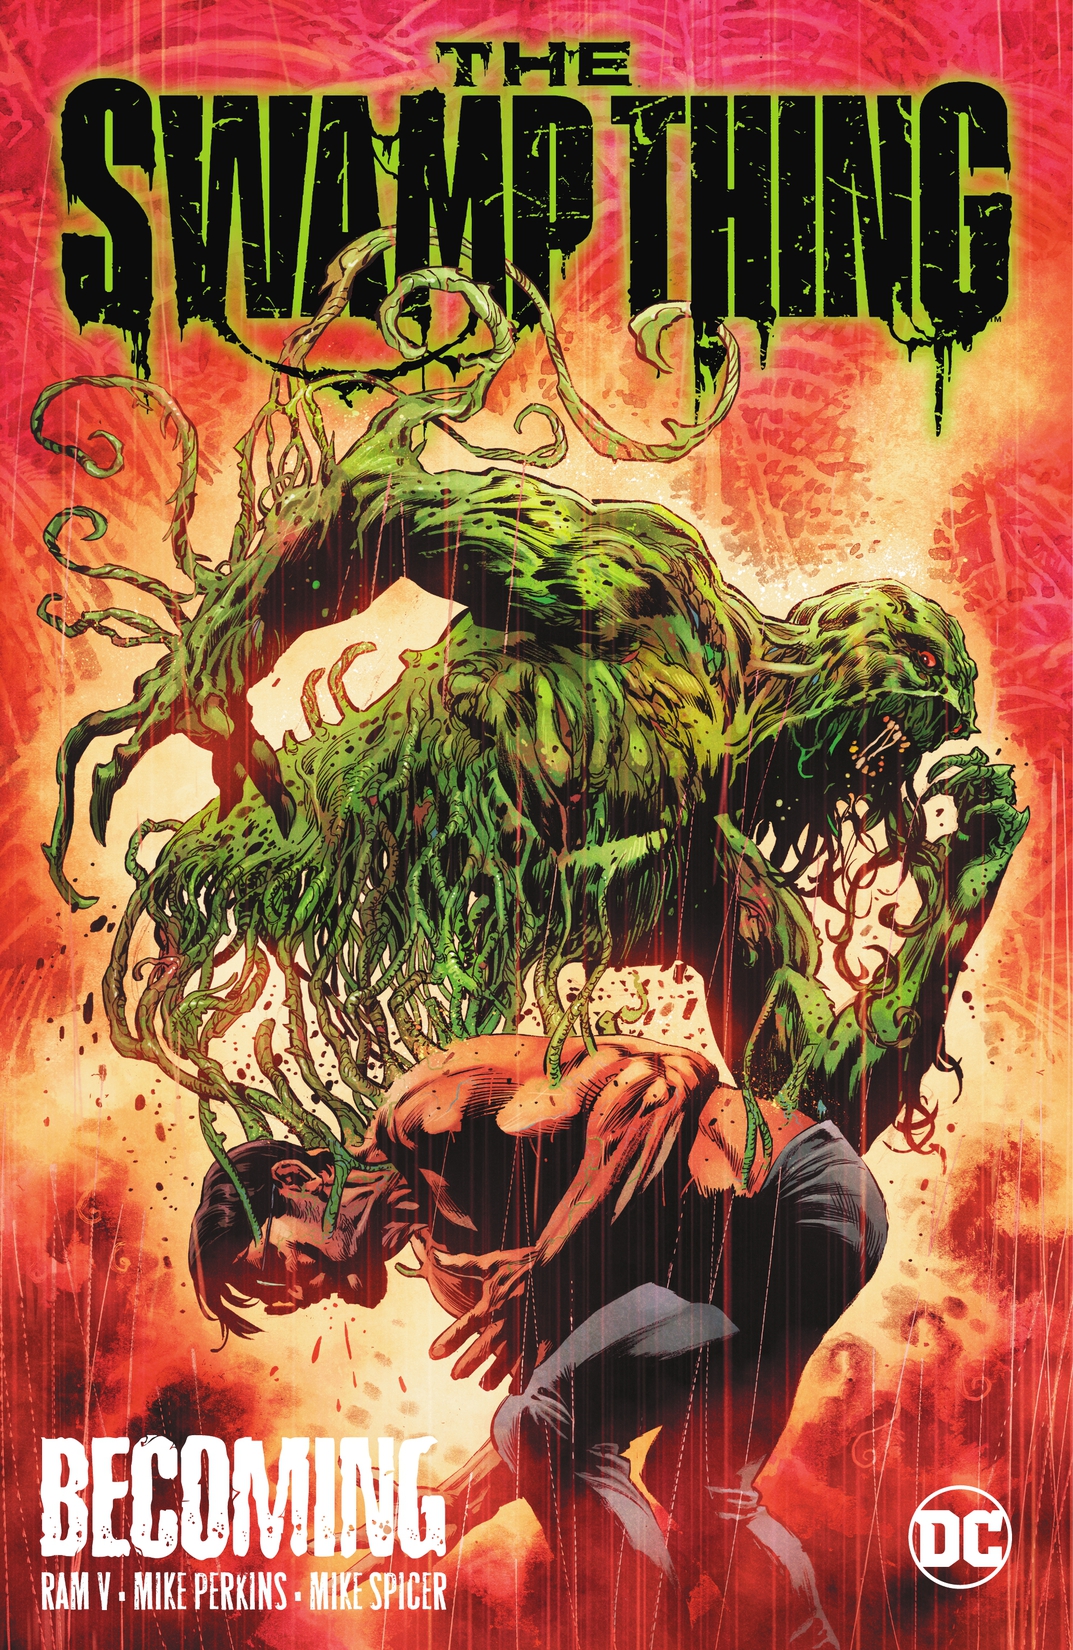 The Swamp Thing Volume 1: Becoming preview images